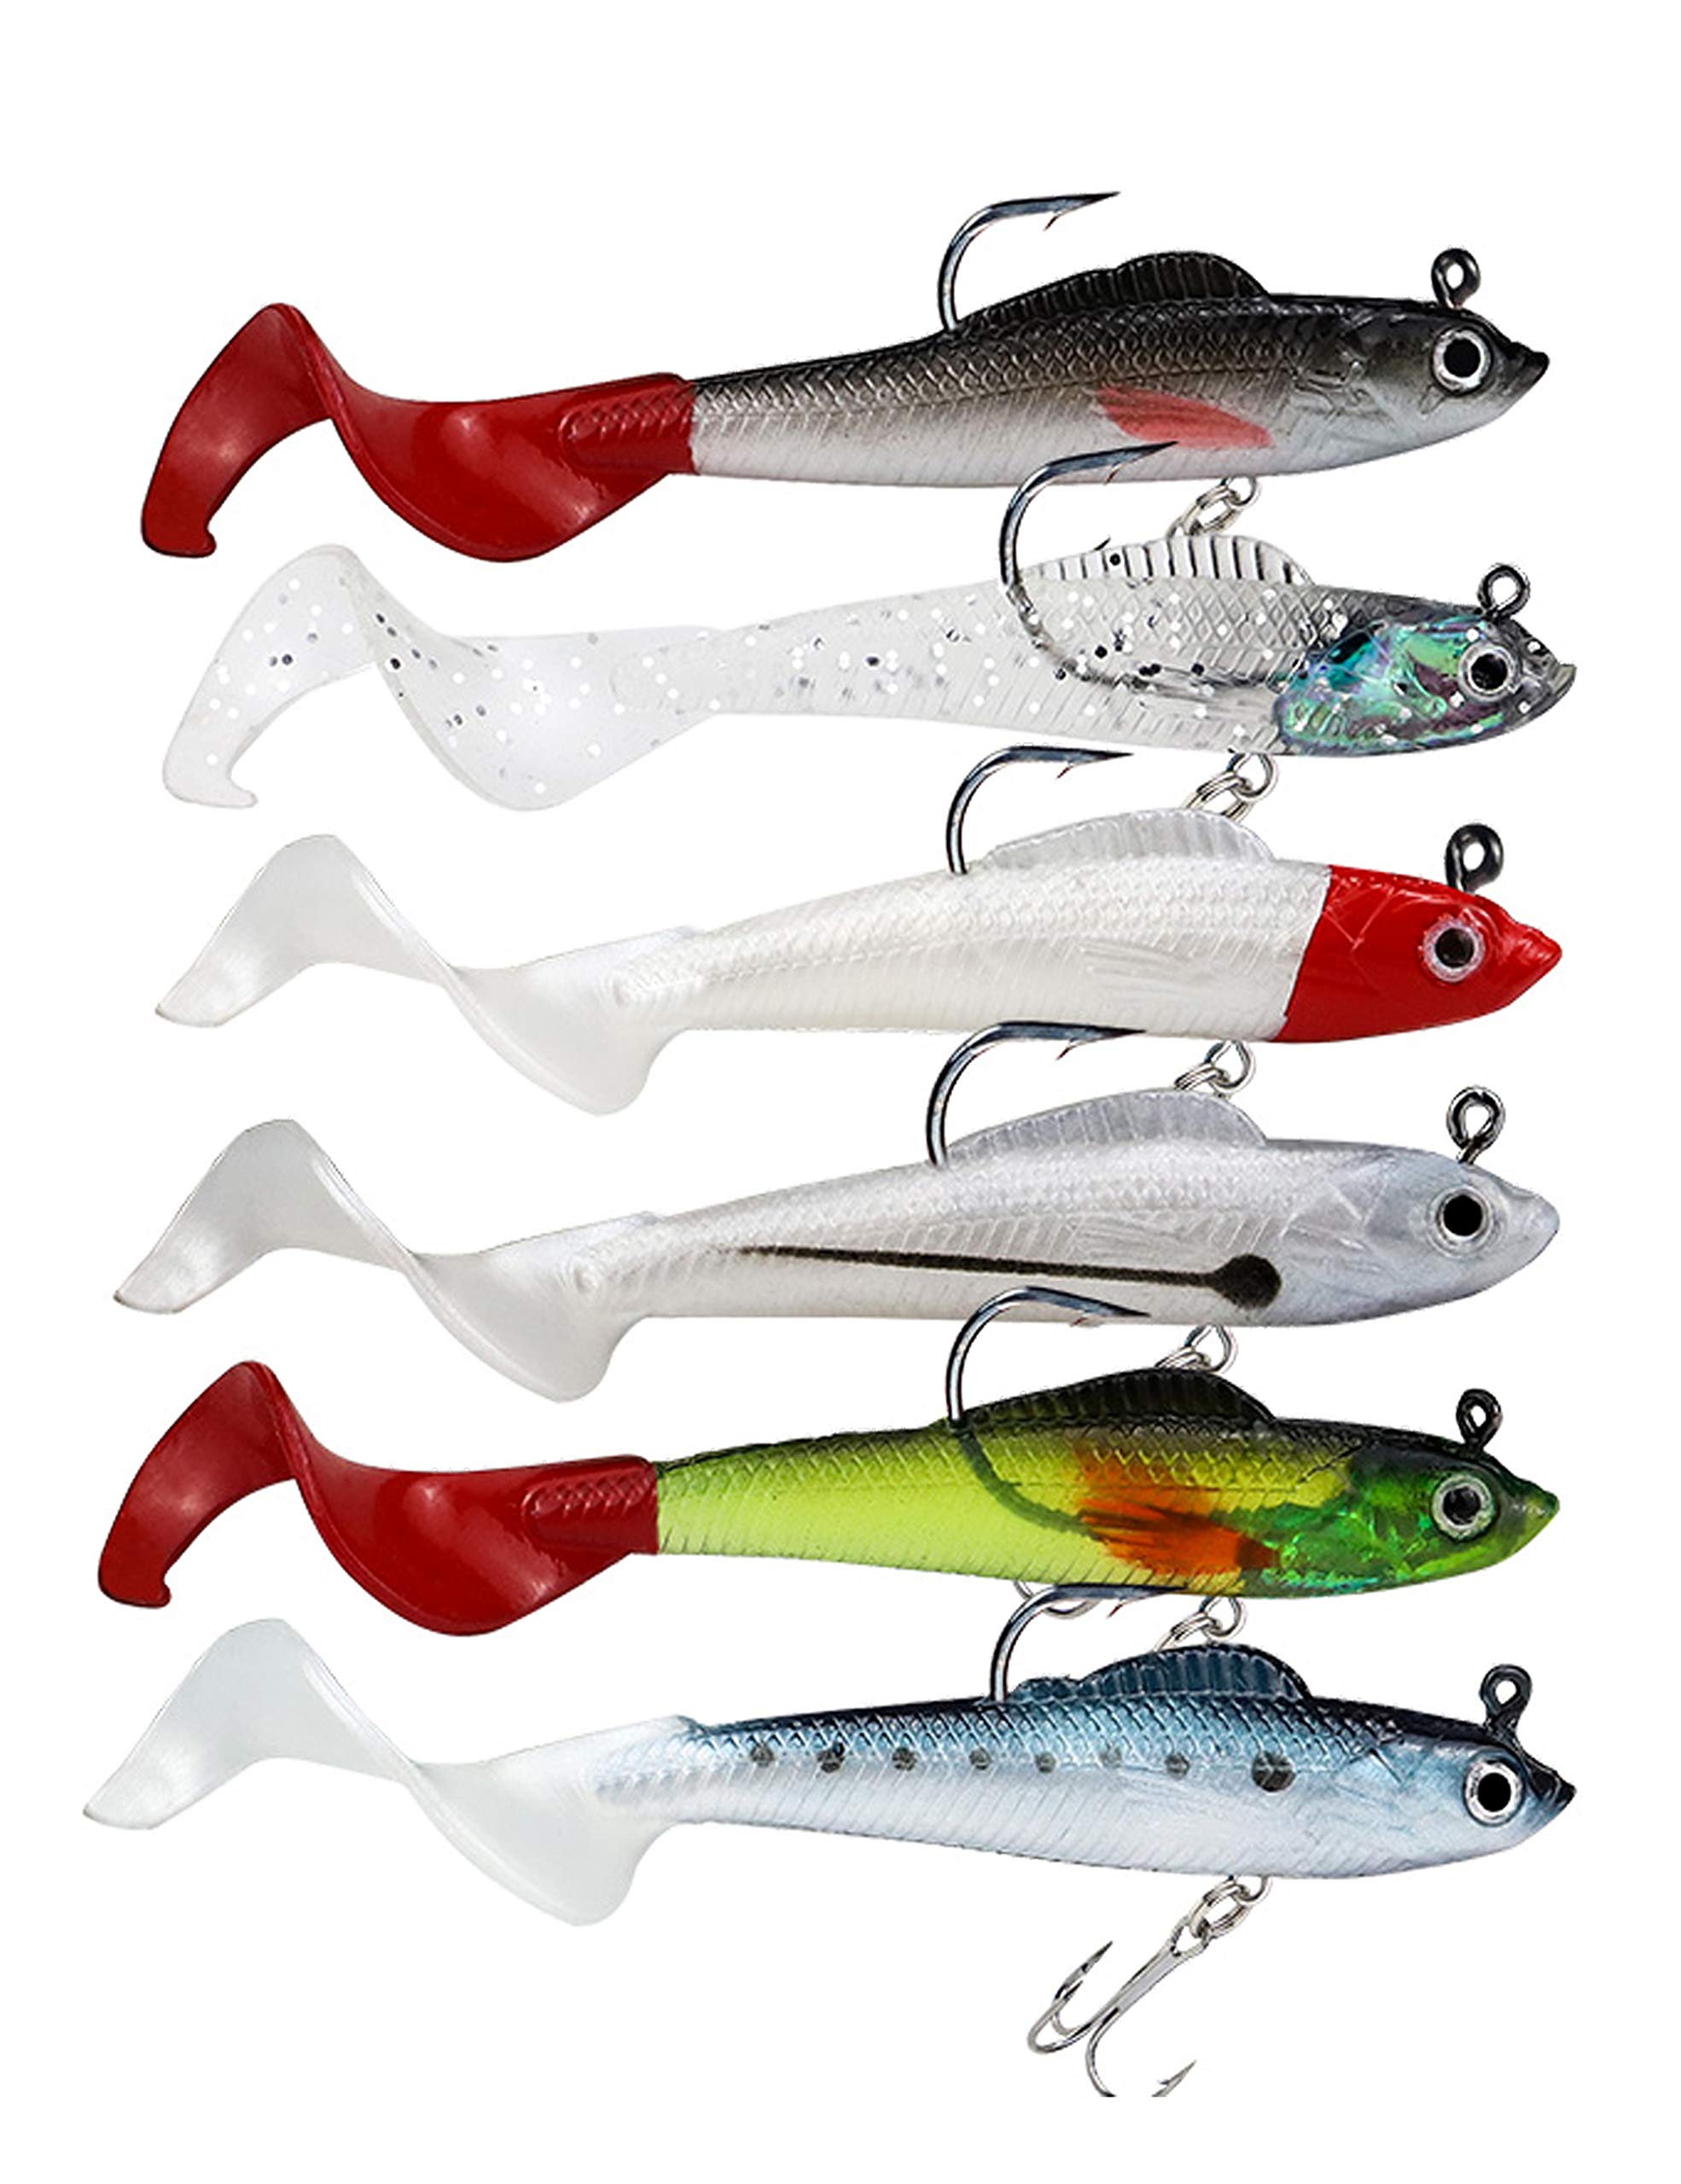 Bass Fishing Lures - Crank Baits Lures for Bass - 6 Colors Wobbler